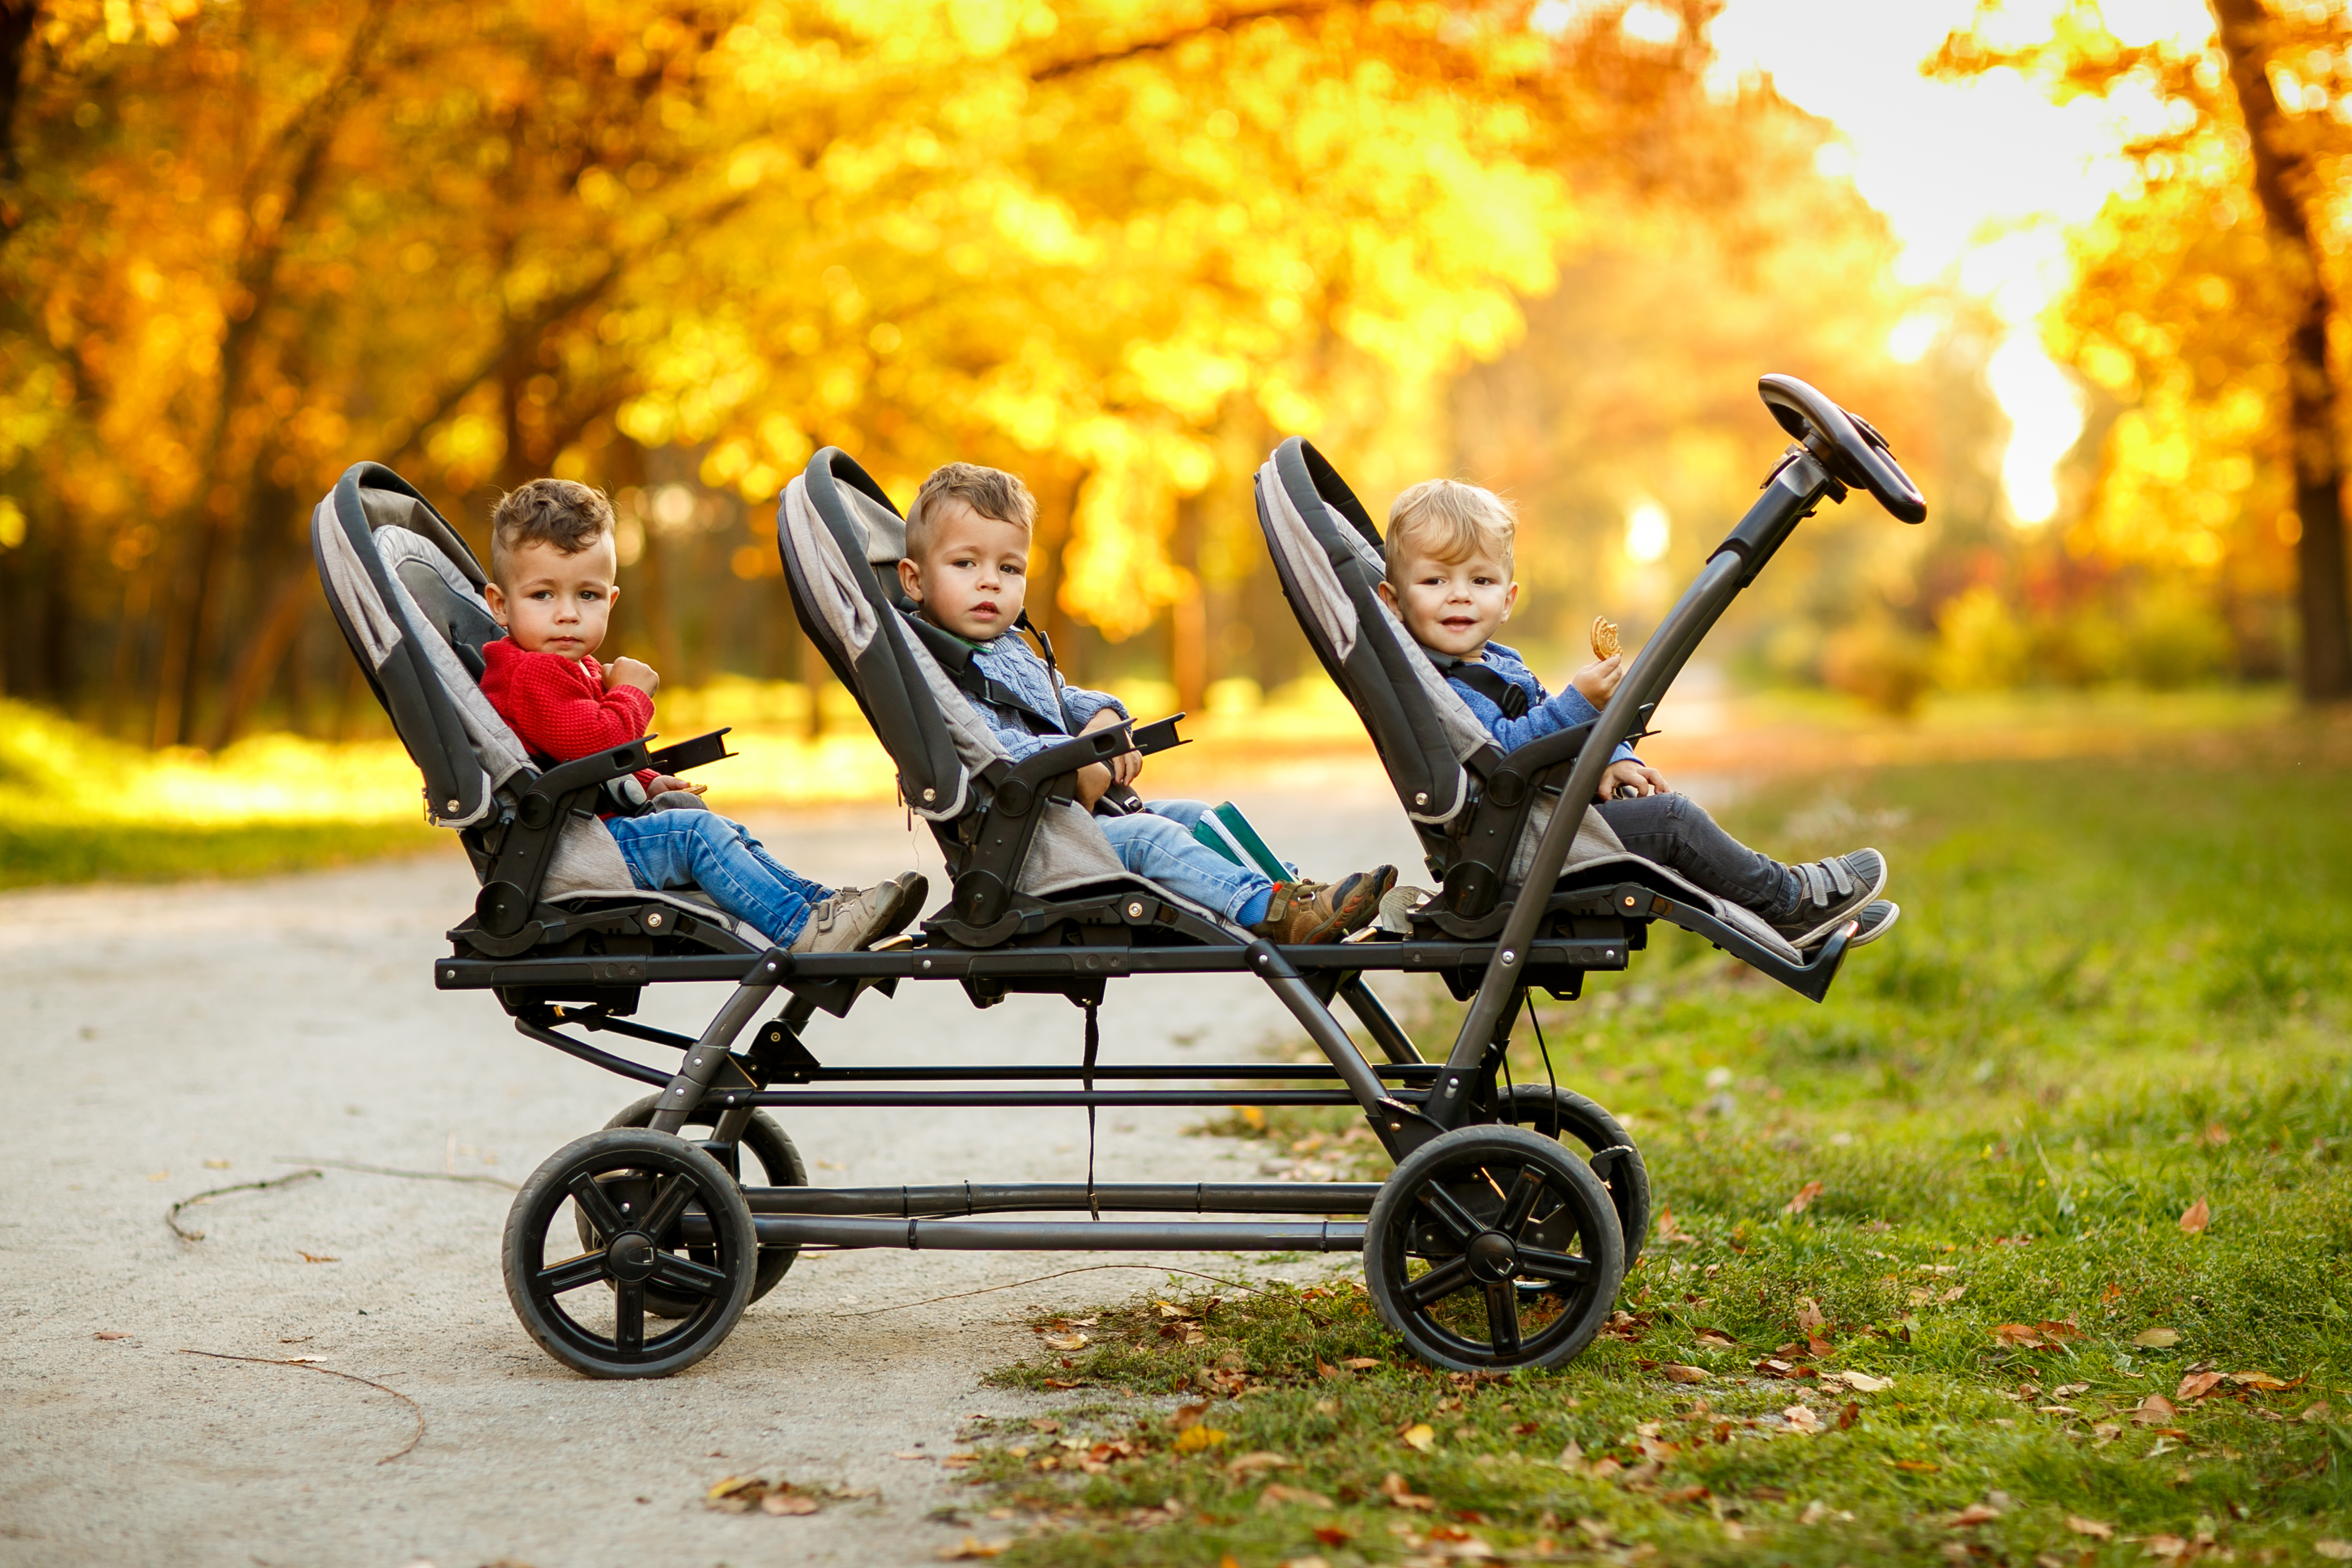 Cheerful triplets in a park. | Source: Shutterstock